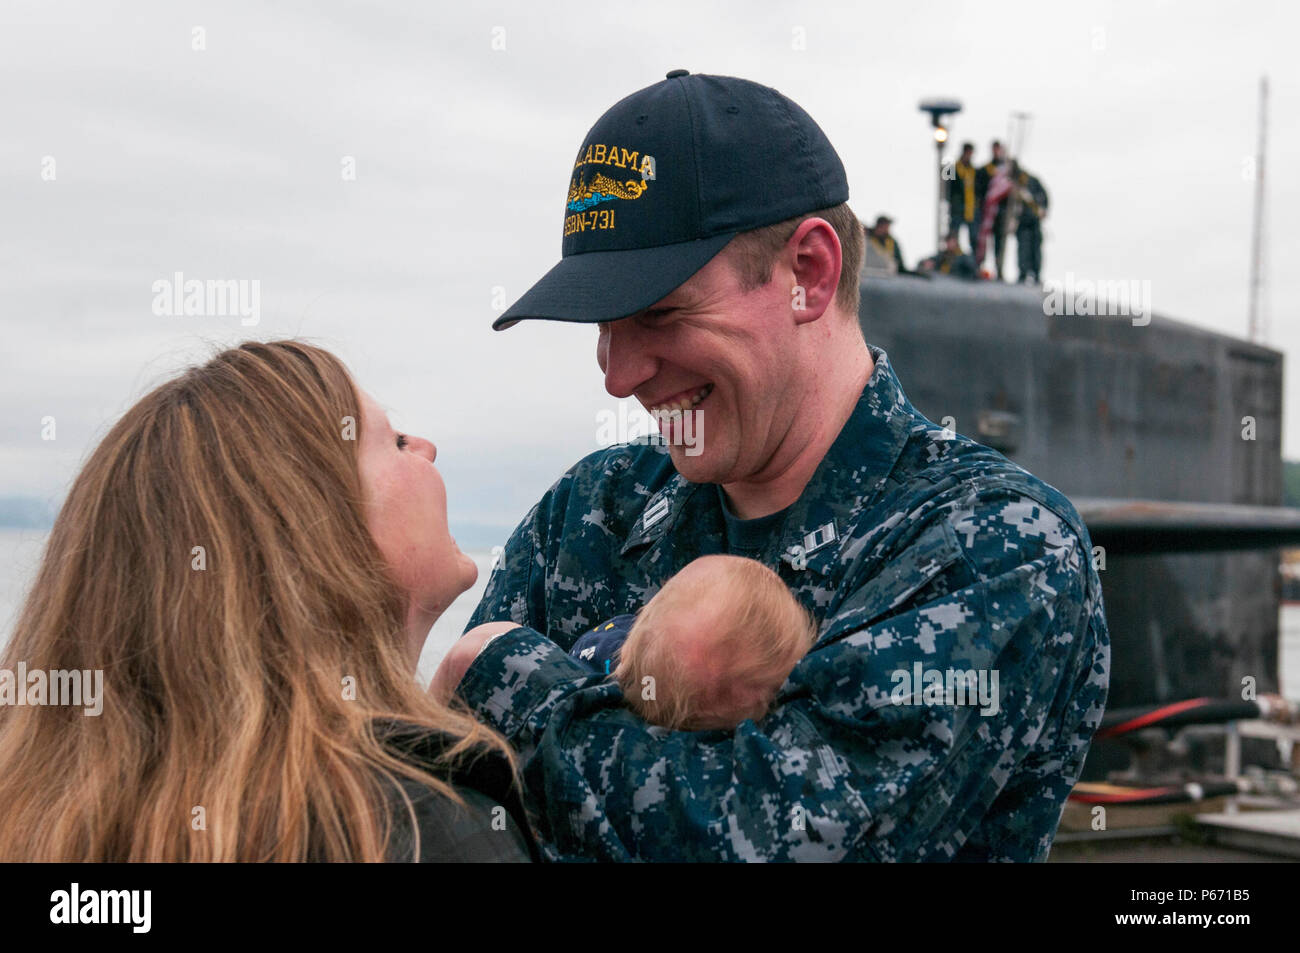 BANGOR, Wash. (May 14, 2016) – Lt. Tim Markley, from Mohnton, Pennsylvania, assigned to the Blue crew of the Ohio-class ballistic-missile submarine USS Alabama (SSBN 731), meets his newborn baby for the first time, as the boat returns to Naval Base Kitsap-Bangor following a routine strategic deterrent patrol. Alabama is one of eight ballistic-missile submarines stationed at the base providing the most survivable leg of the strategic deterrence triad for the United States. (U.S. Navy photo by Mass Communication Specialist 2nd Class Amanda R. Gray/Released) Stock Photo